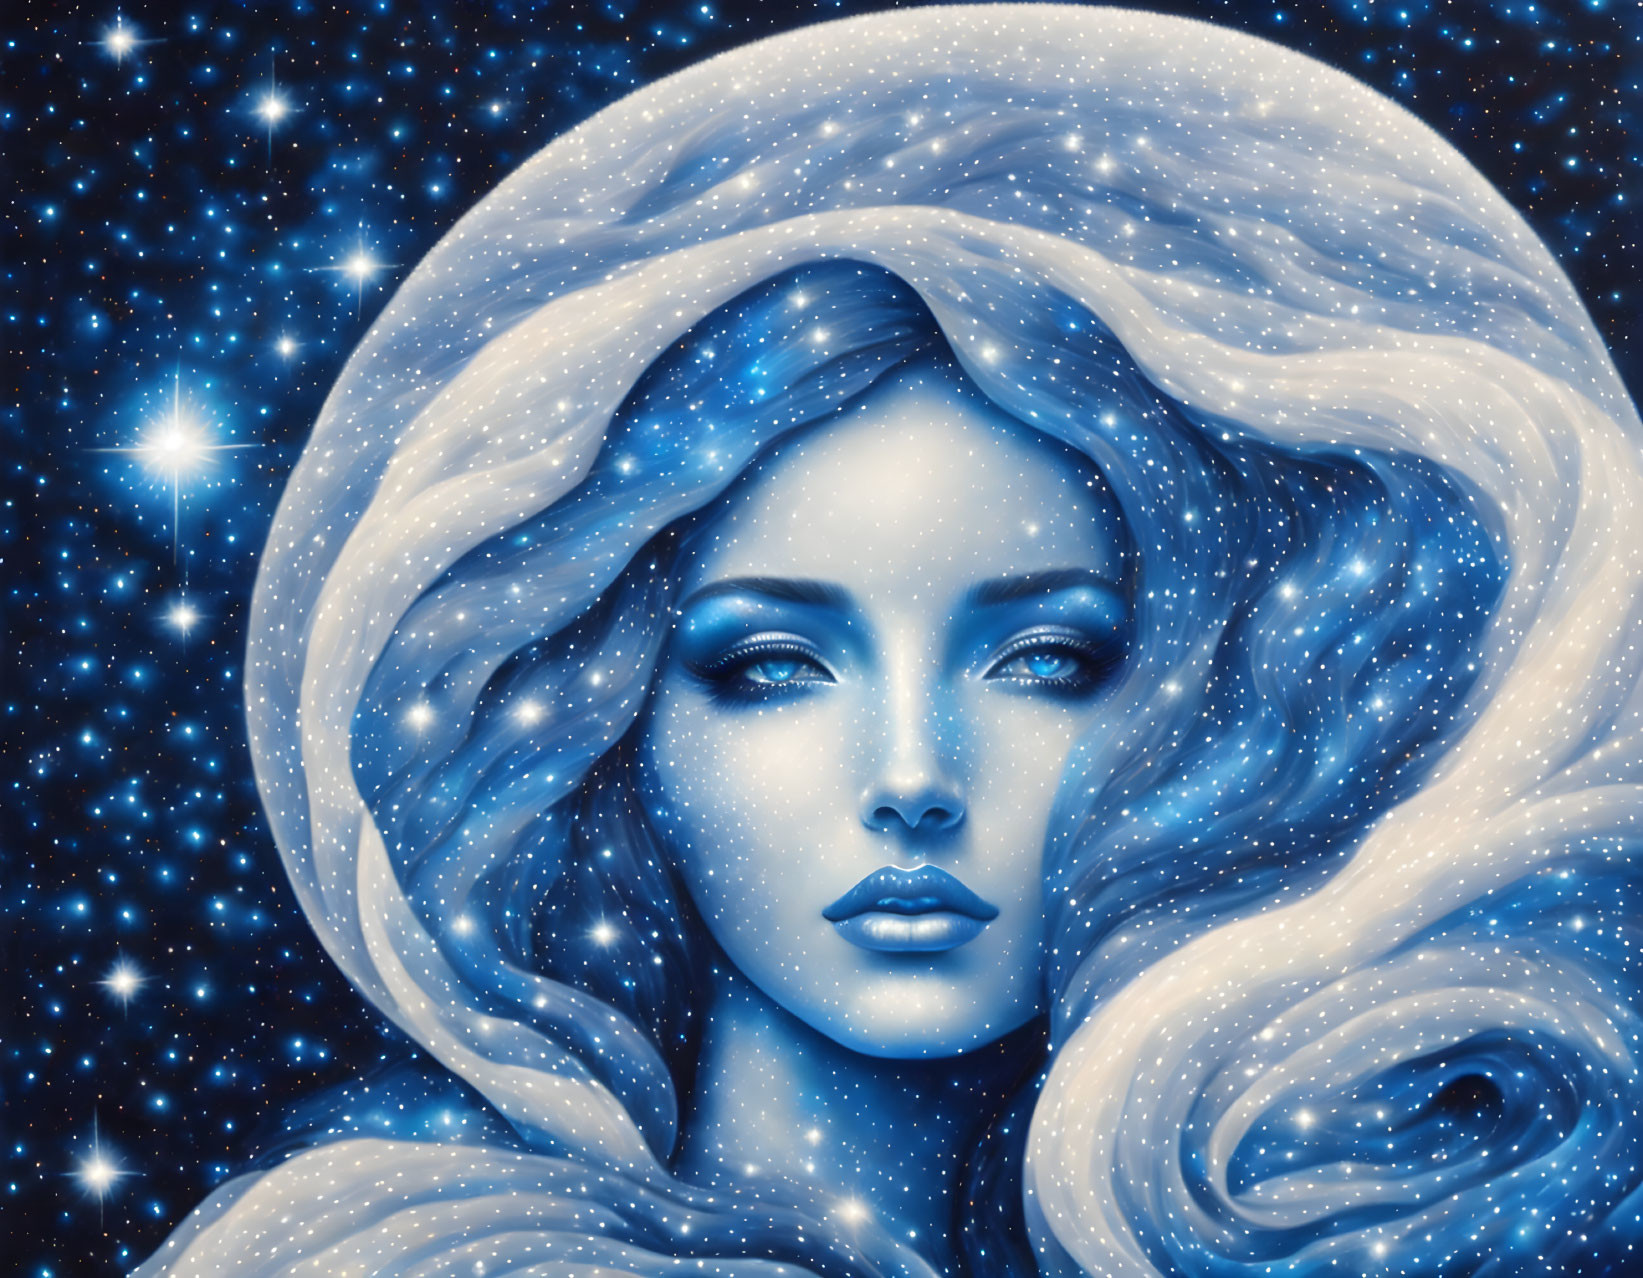 Woman's face blending with starry night sky, hair flowing like cosmic waves